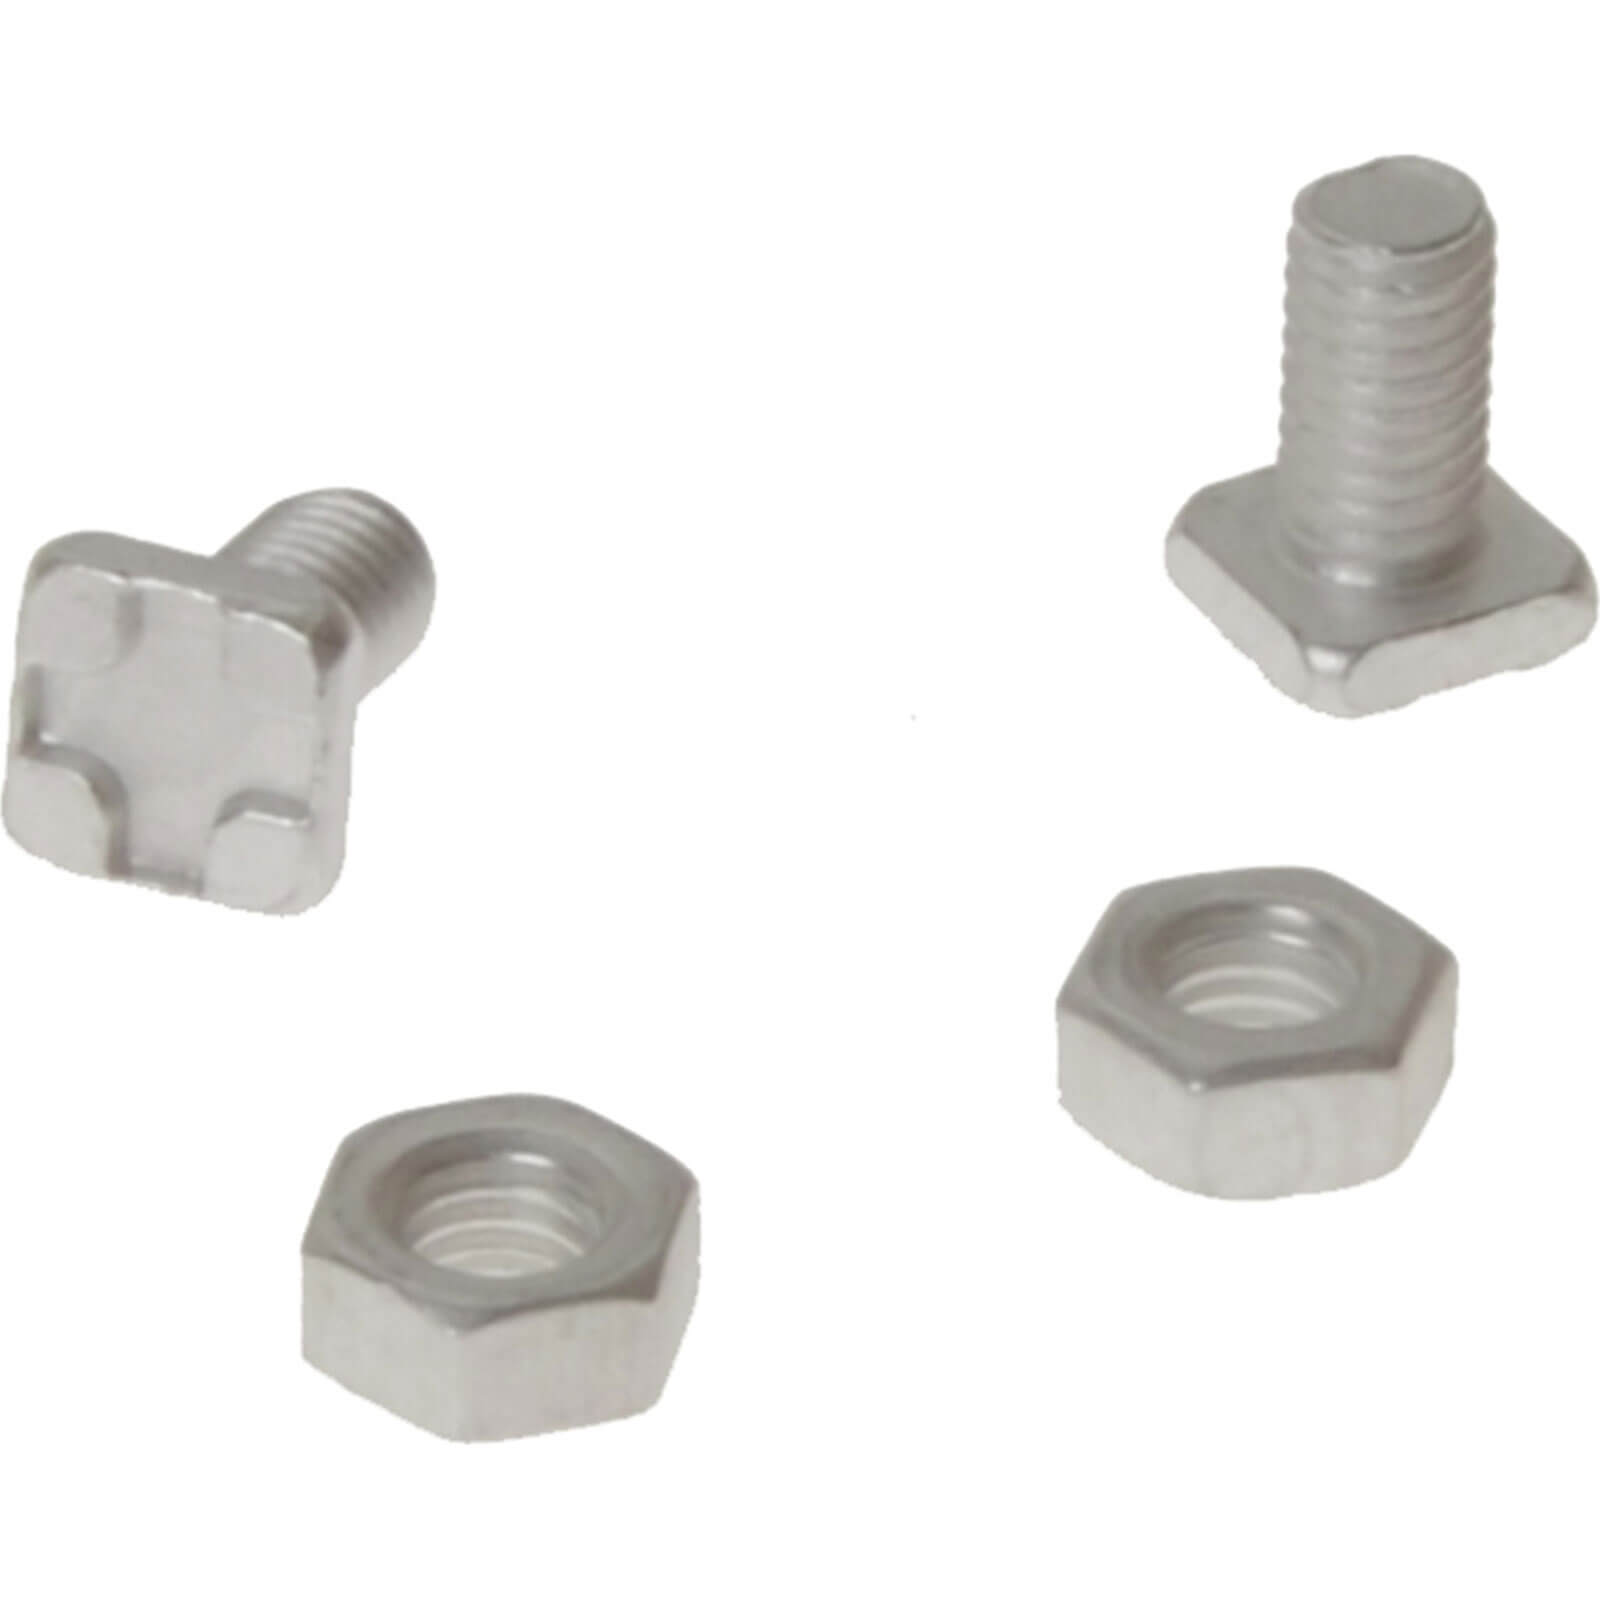 Image of ALM GH004 Aluminium Square Head Bolts and Nuts Pack of 20